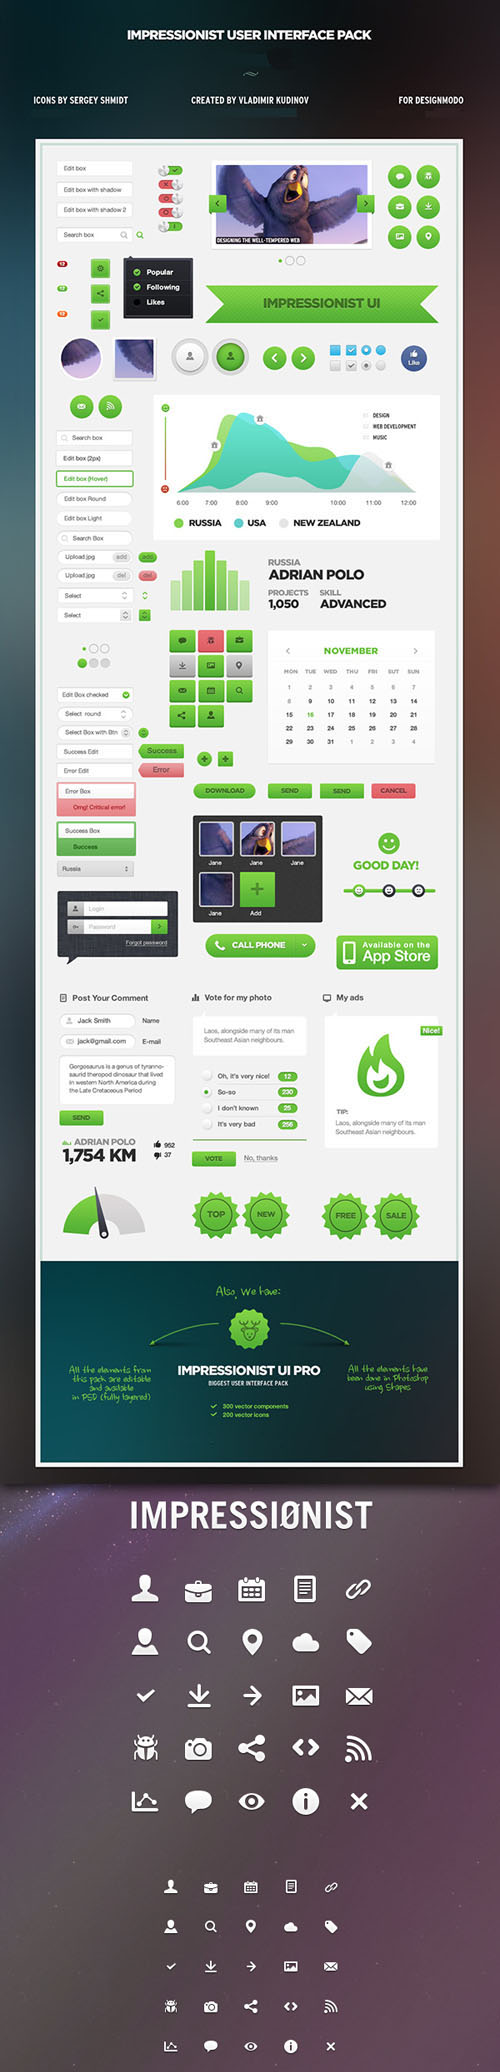 Impressionist User Interface Pack